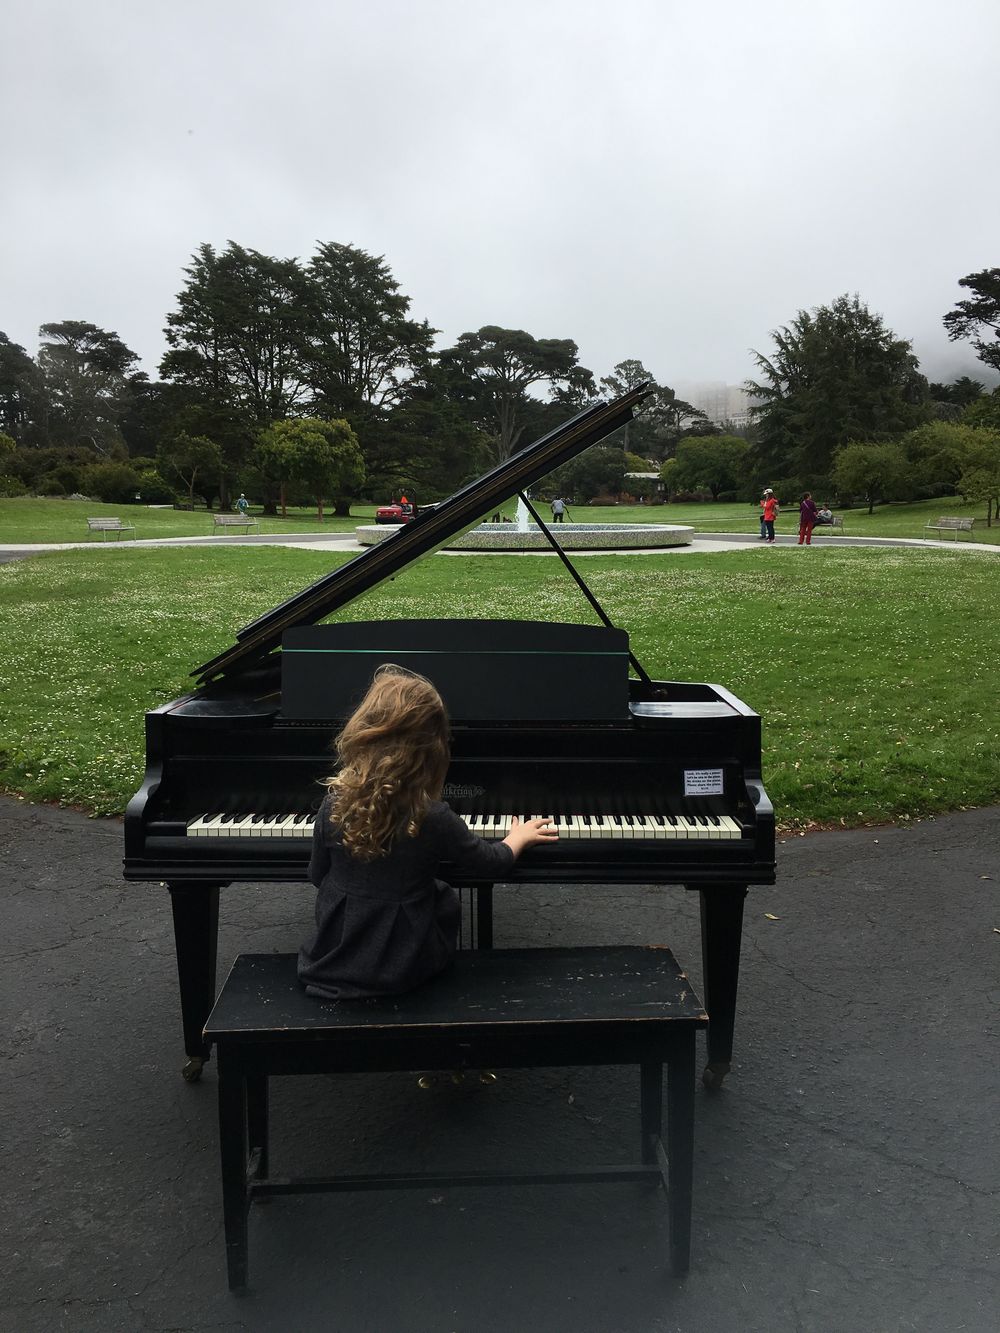 Out & About: the Flower Piano at the San Francisco Botanical Garden